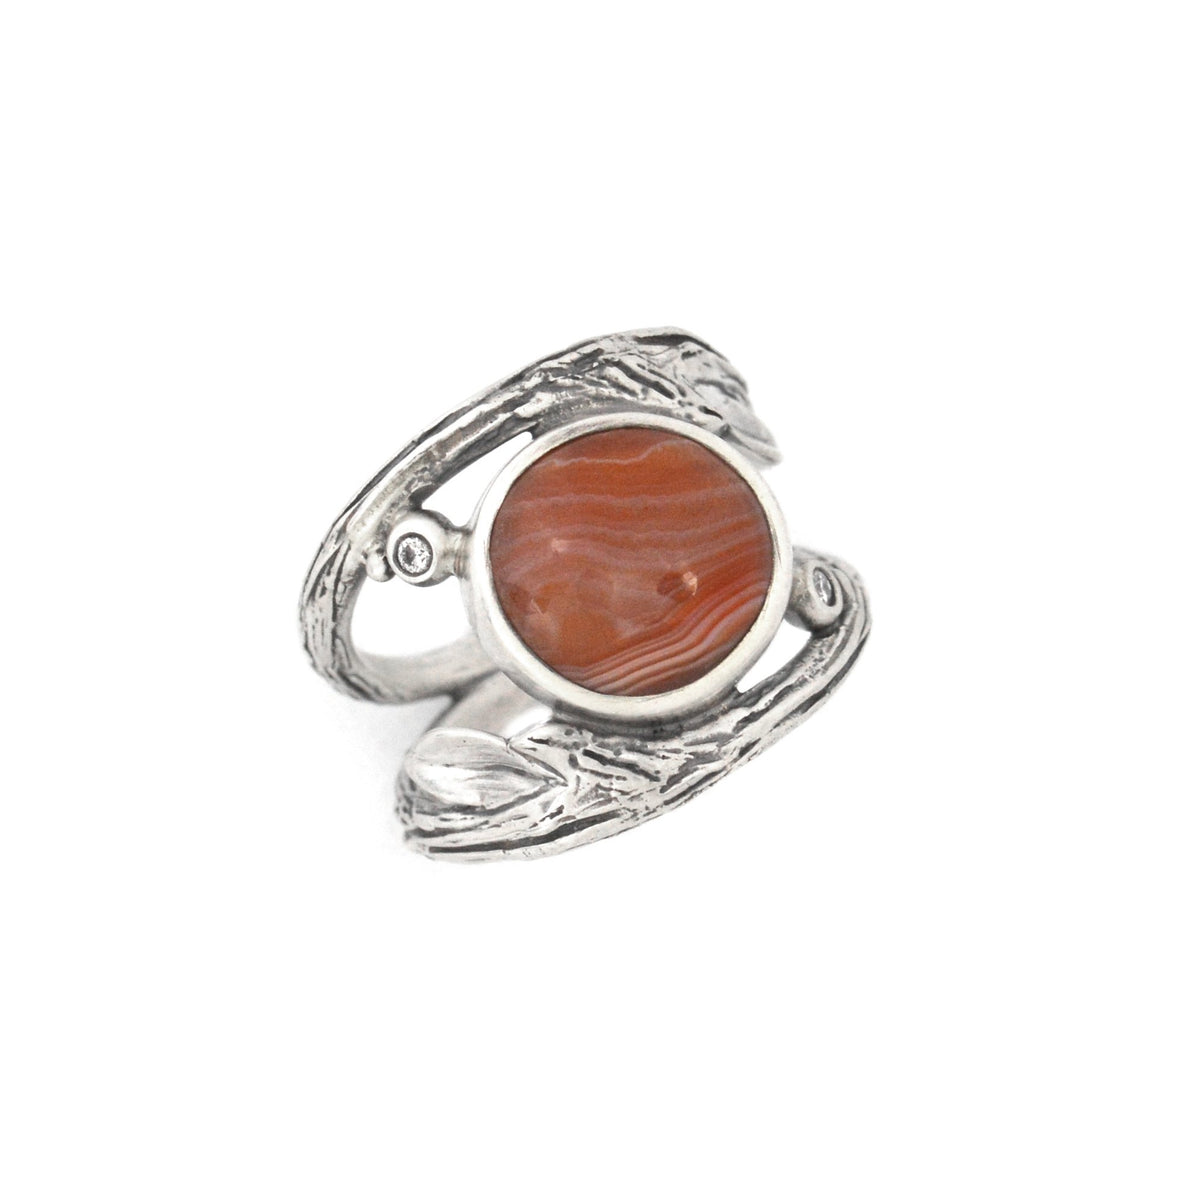 Dewdrop Forest Ring - Size 5.75 - Ring   3458 - handmade by Beth Millner Jewelry